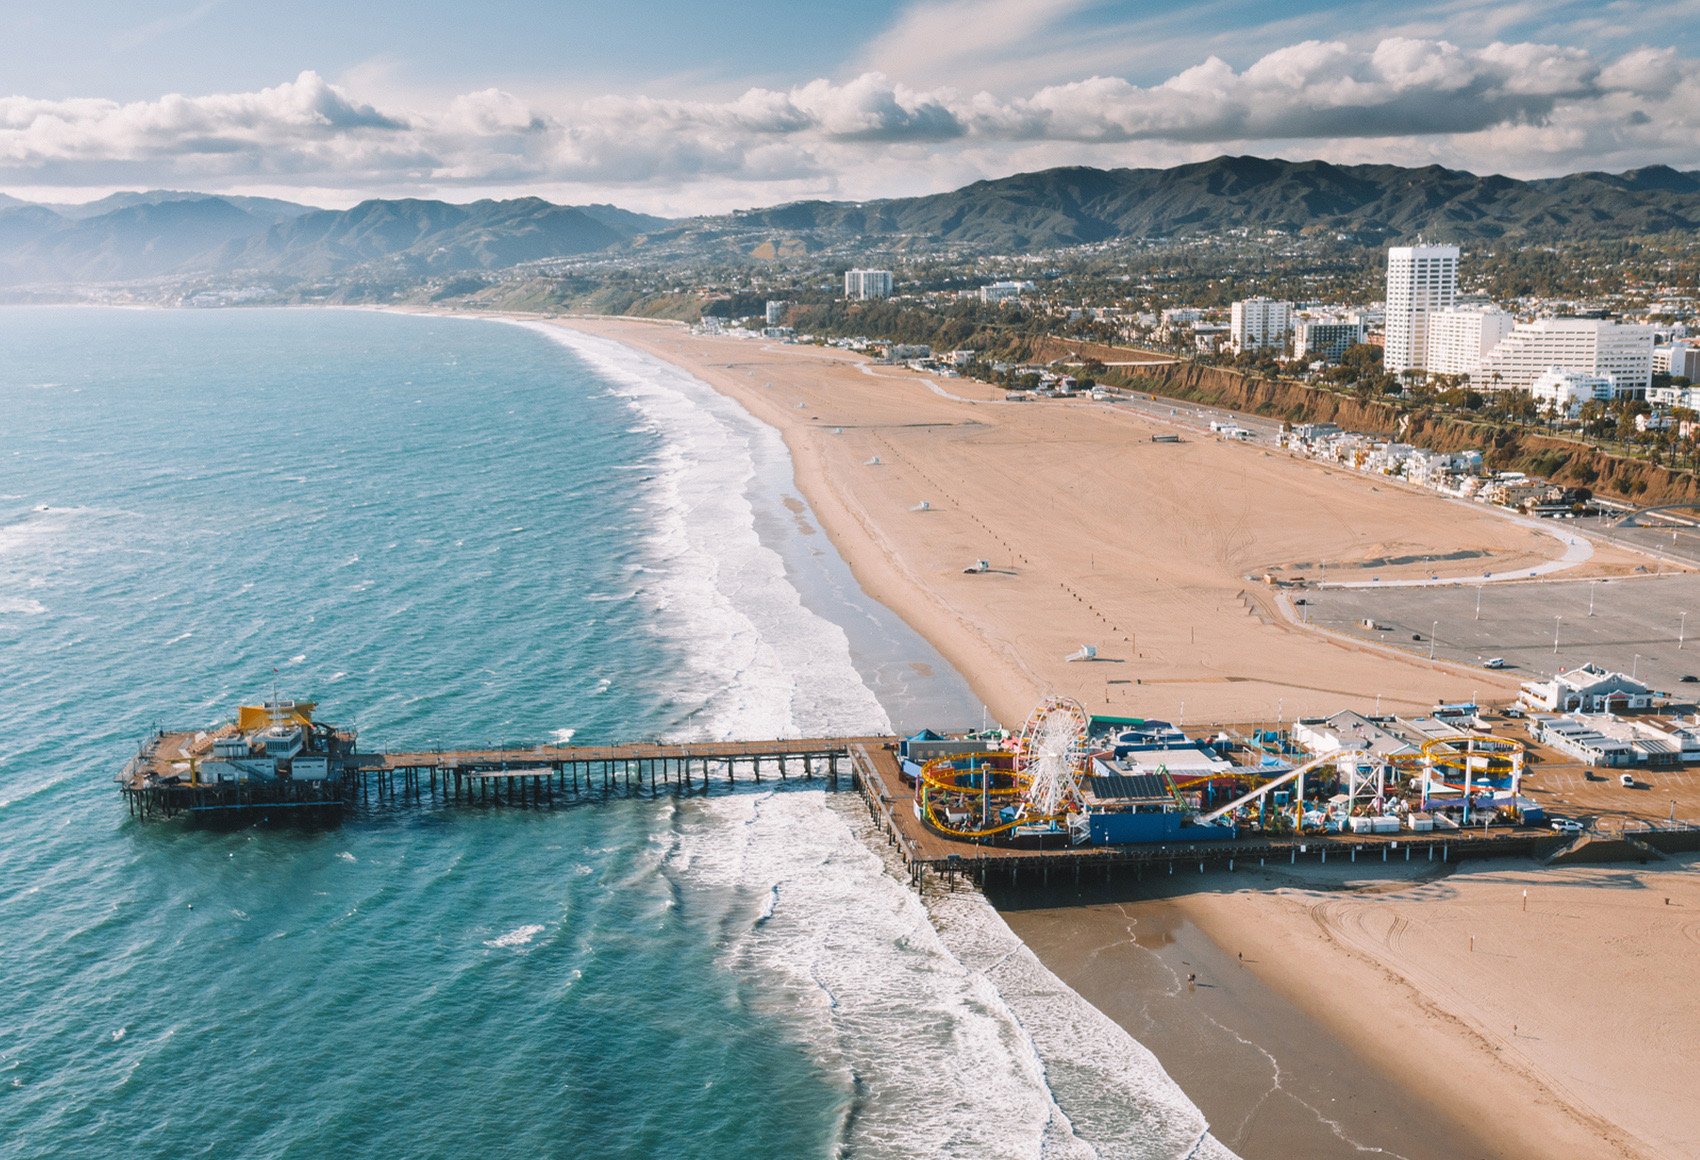 View of the Santa Monica State Beach Pier and the ocean